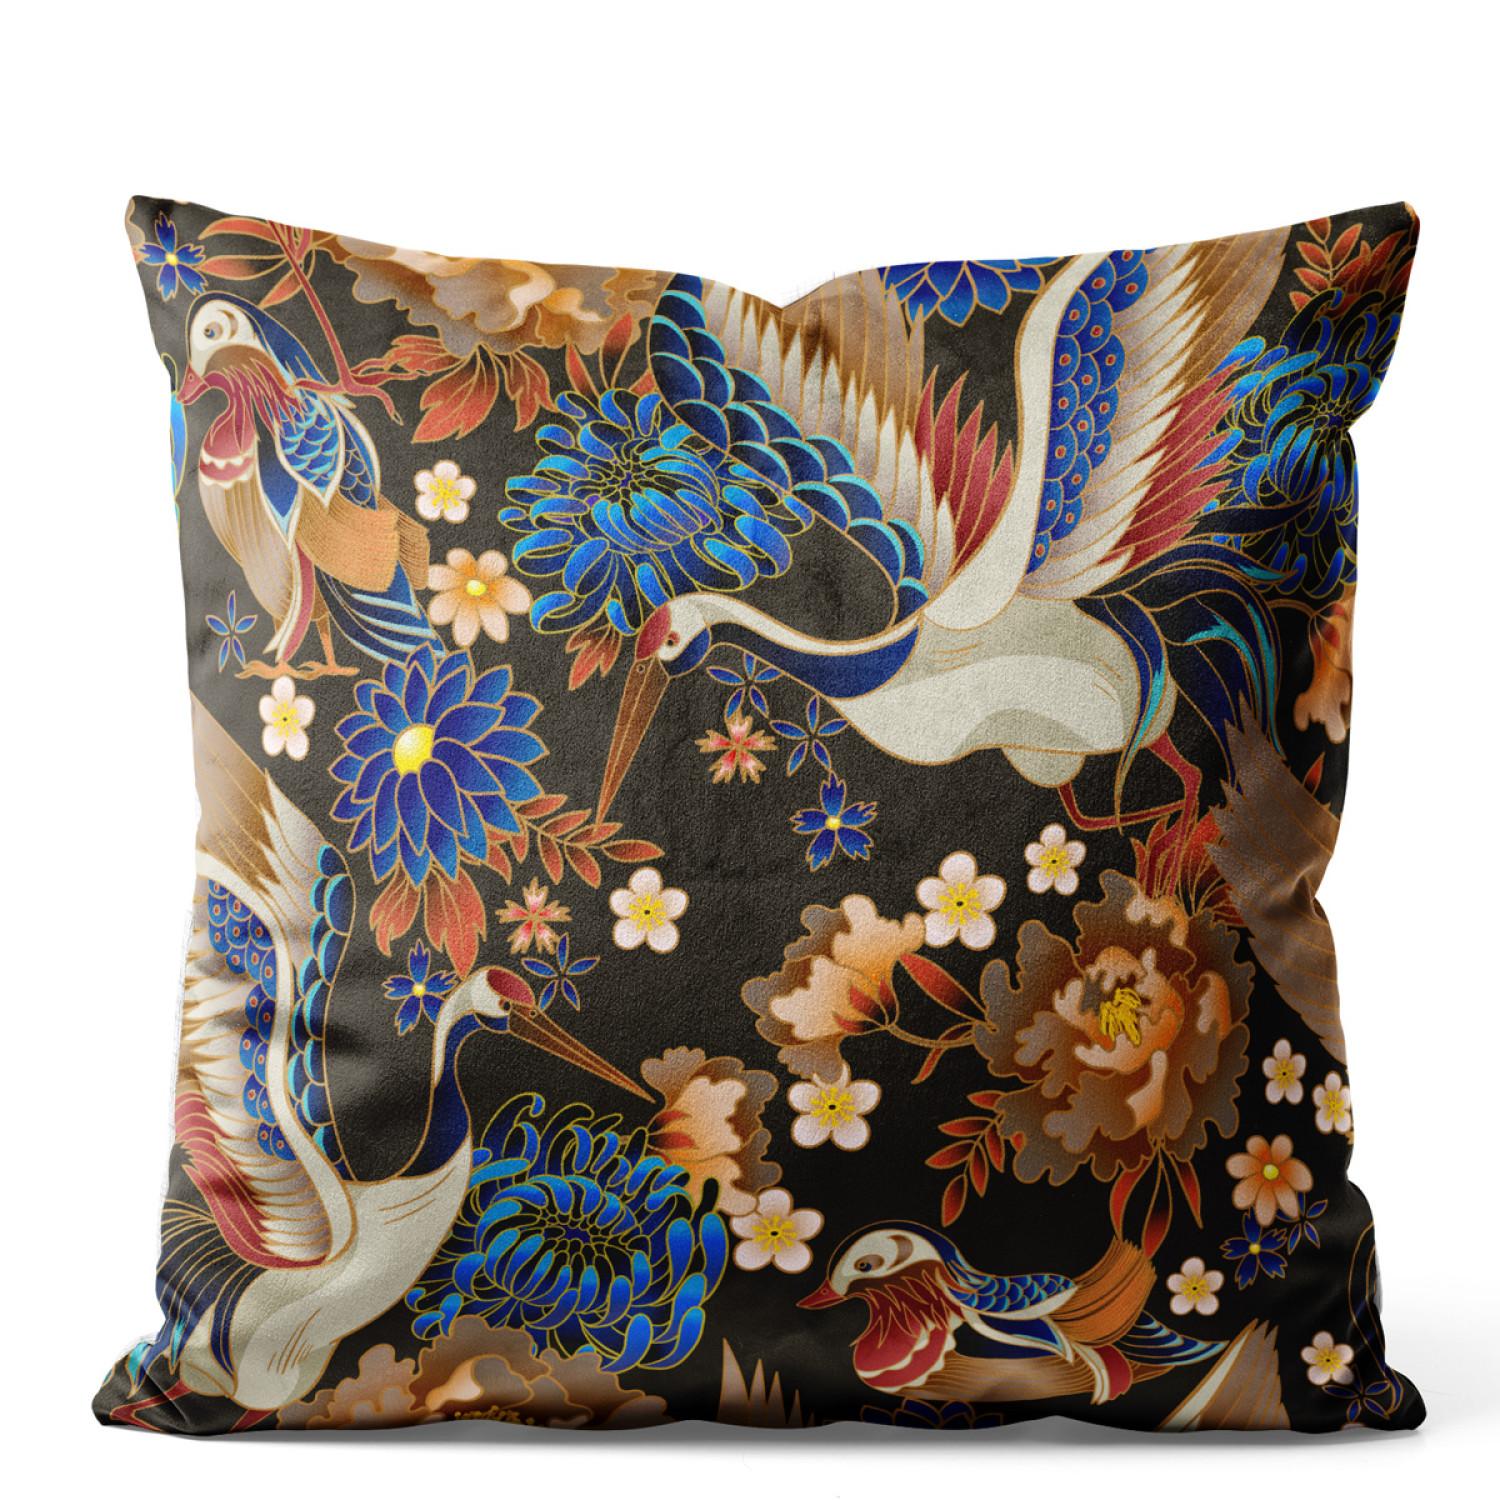 Decorative Velor Pillow Birdy paradise - pattern with multicoloured flowers on dark background